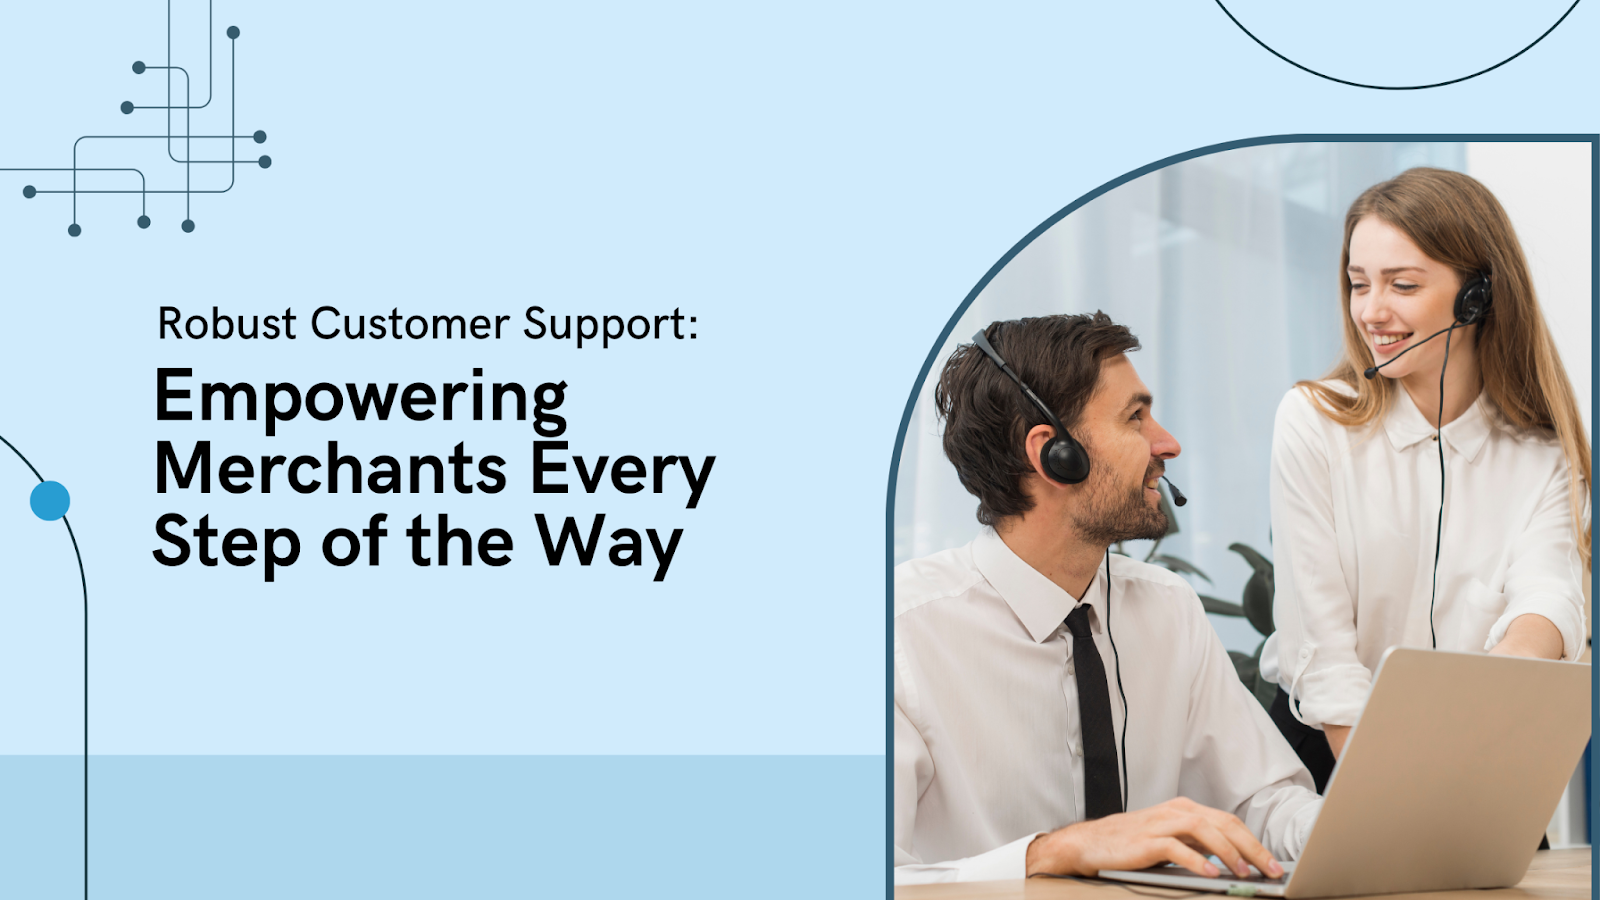 Robust Customer Support Empowering Merchants Every Step of the Way 9